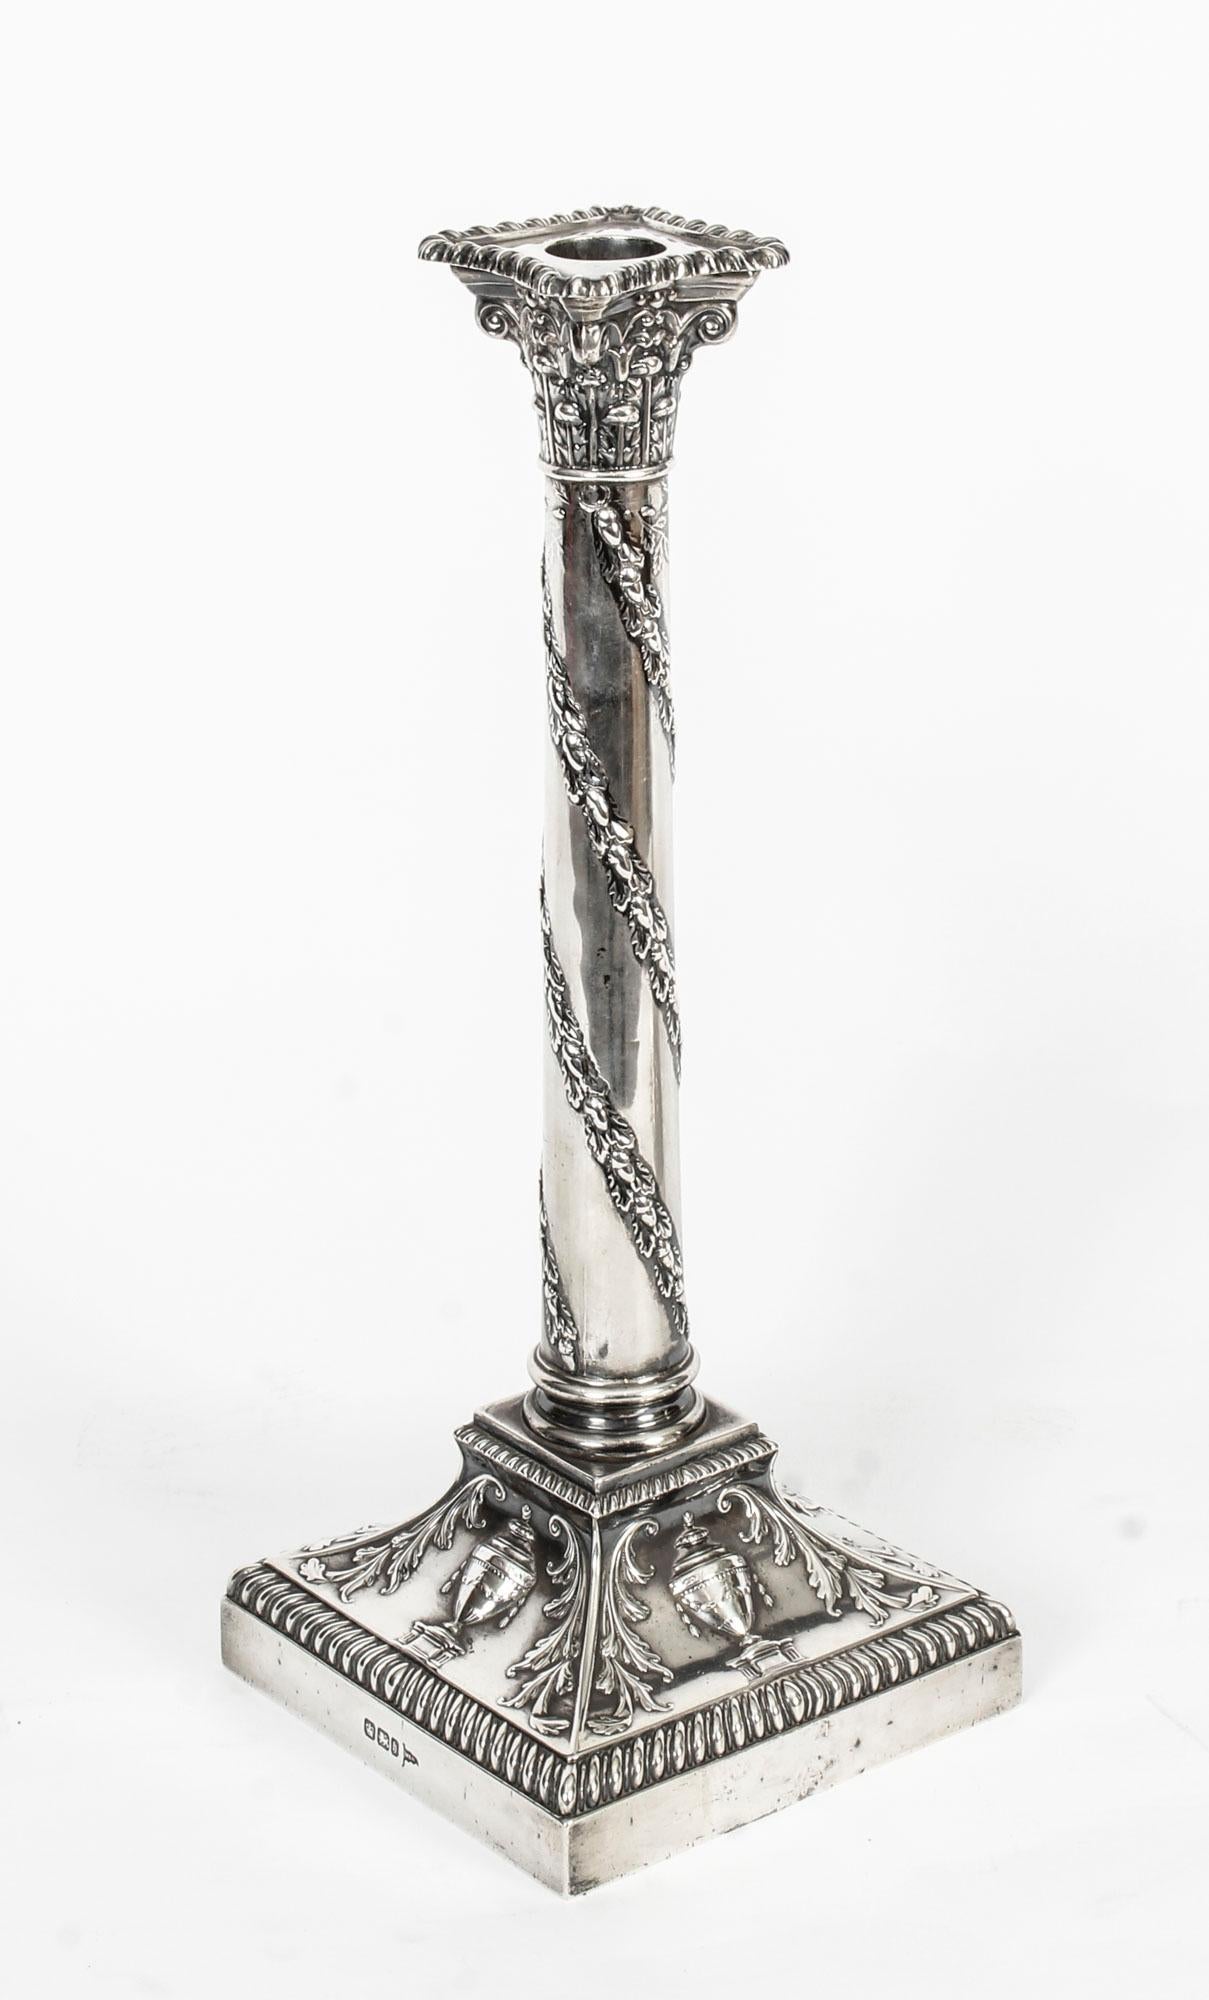 Neoclassical Antique Pair of Sterling Silver Candlesticks Walker and Hall, 1900